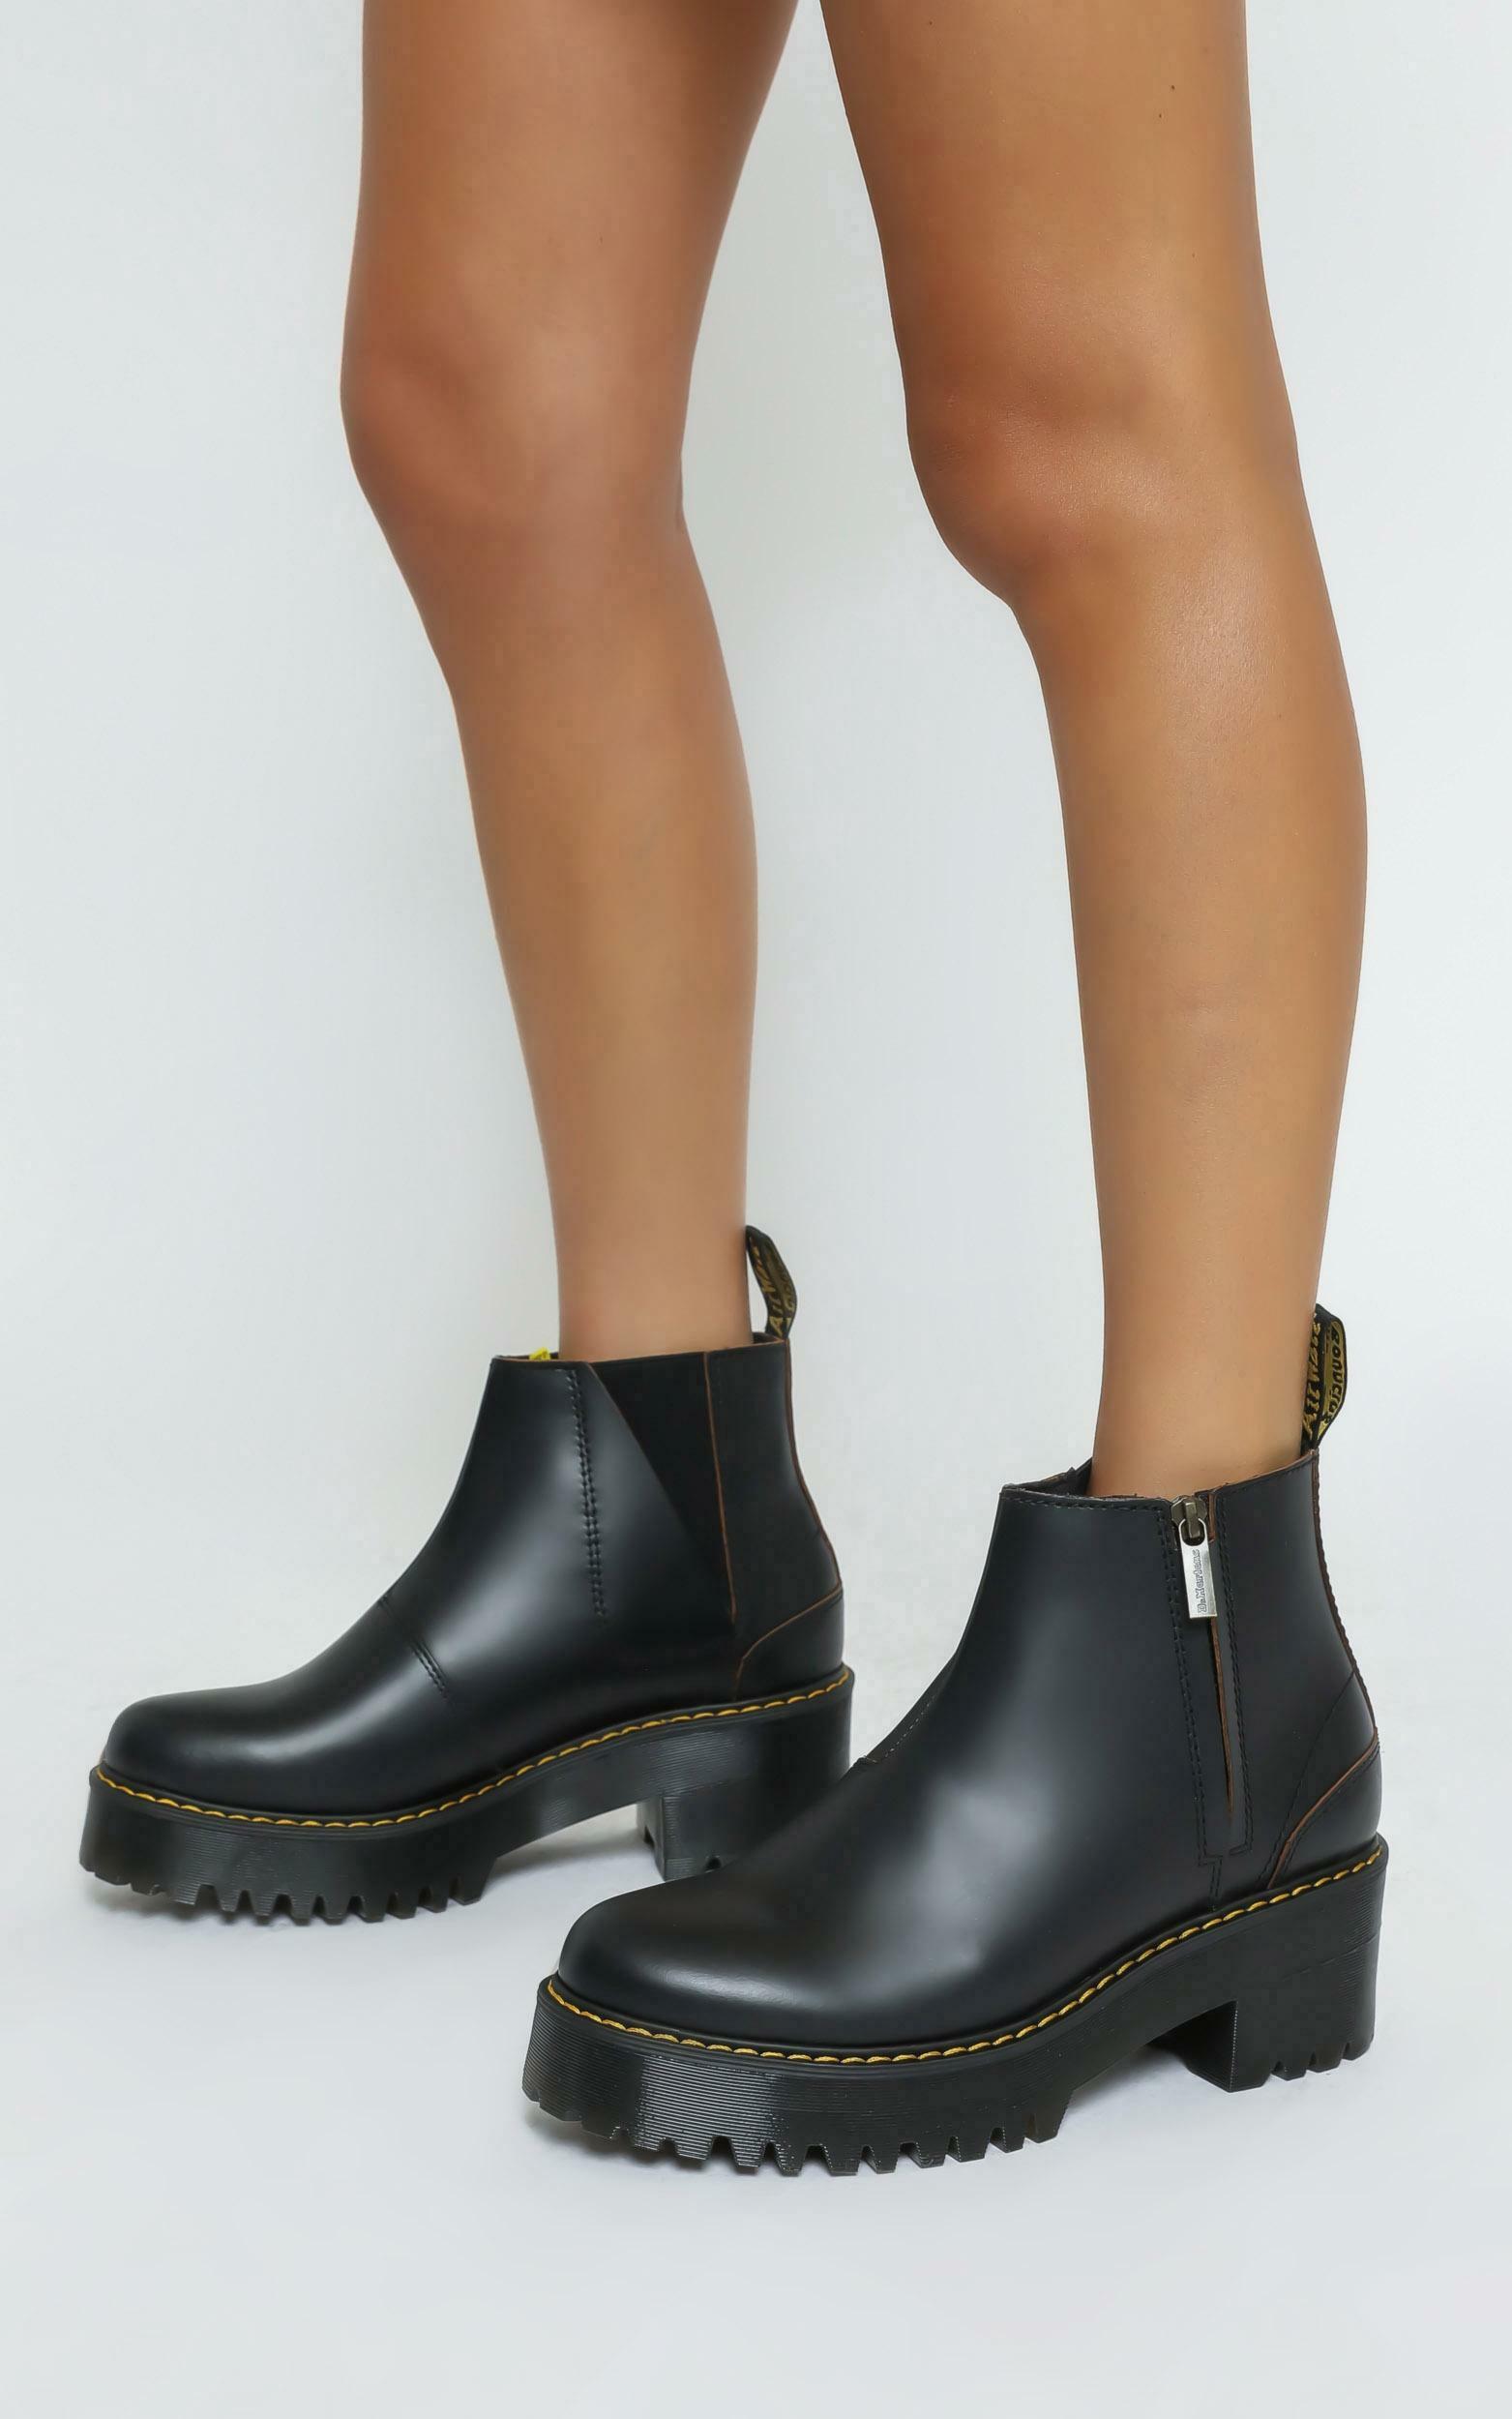 Dr. Martens - Rometty II Chelsea Boot in Black - 06, BLK1, hi-res image number null